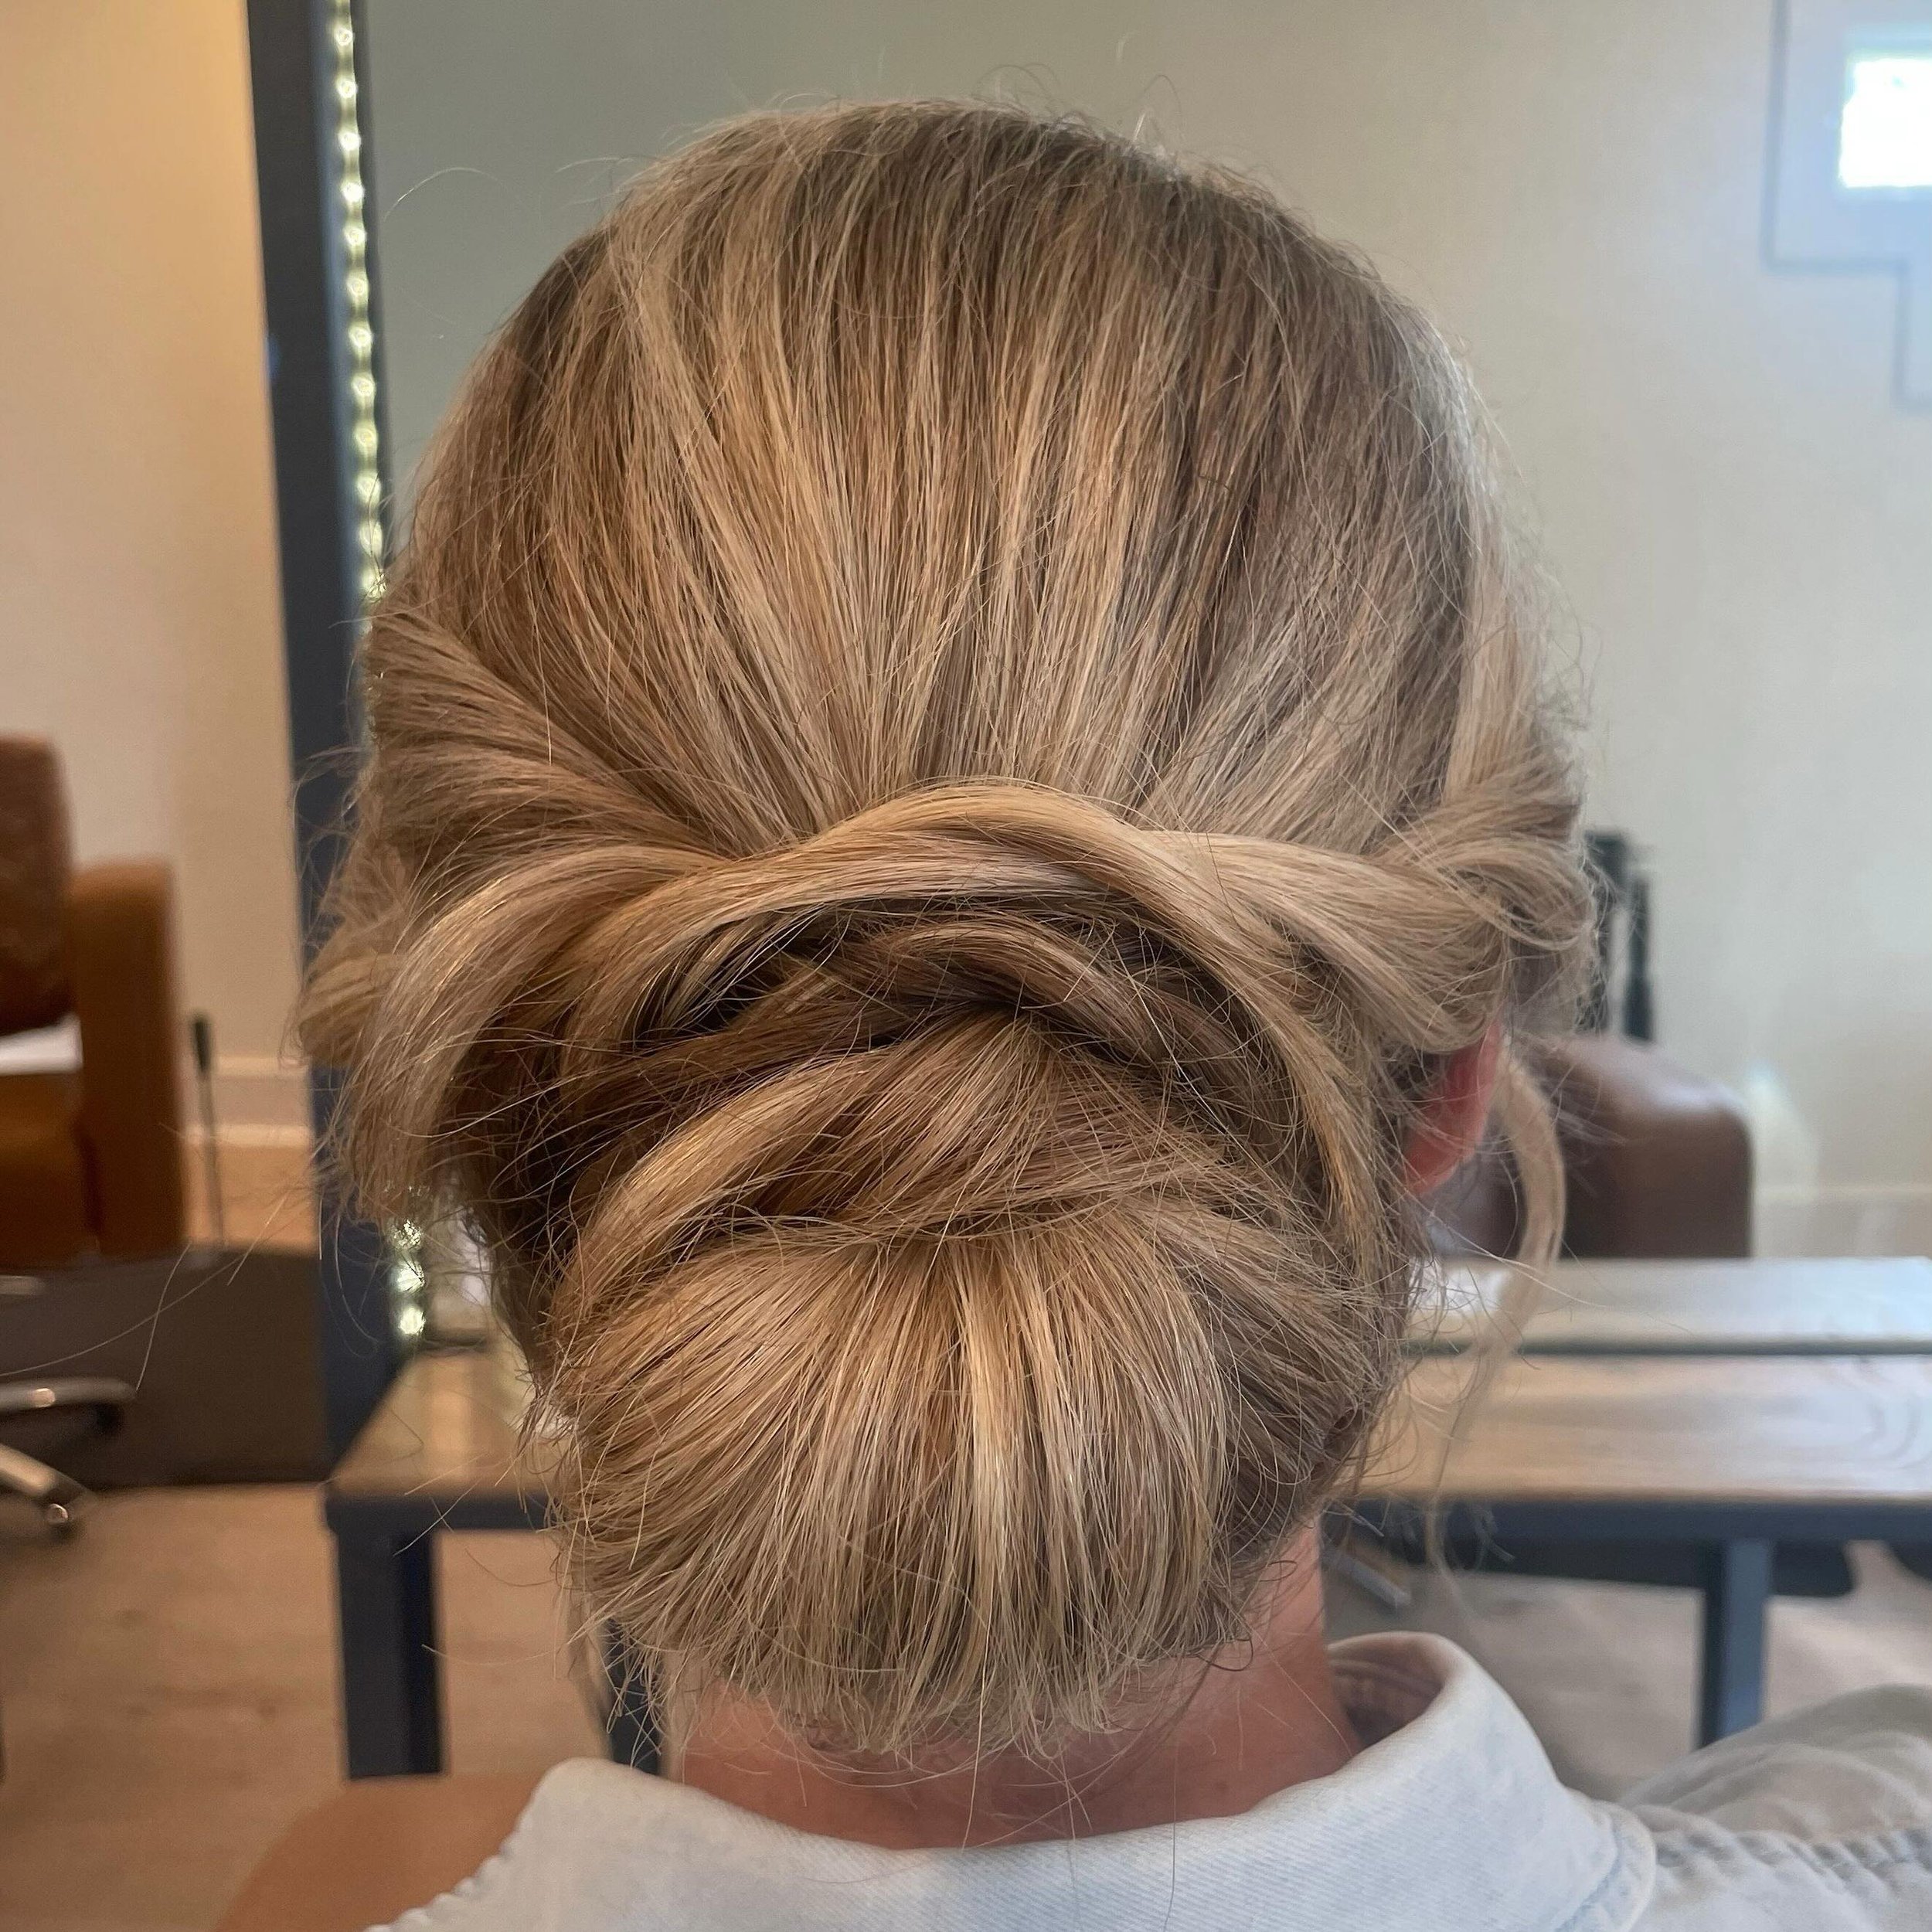 Today&rsquo;s heat had us dreaming of updos!⁠
⁠
Simple, sofisticated, and a touch of fun. This updo was created by @moxiemiller_maddie for a Charleston wedding.⁠
⁠
#moxiemiller⁠
#havealittlemoxie⁠
#charlestonsc⁠
#mountpleasantsc⁠
#updos⁠
#hairgoals⁠
